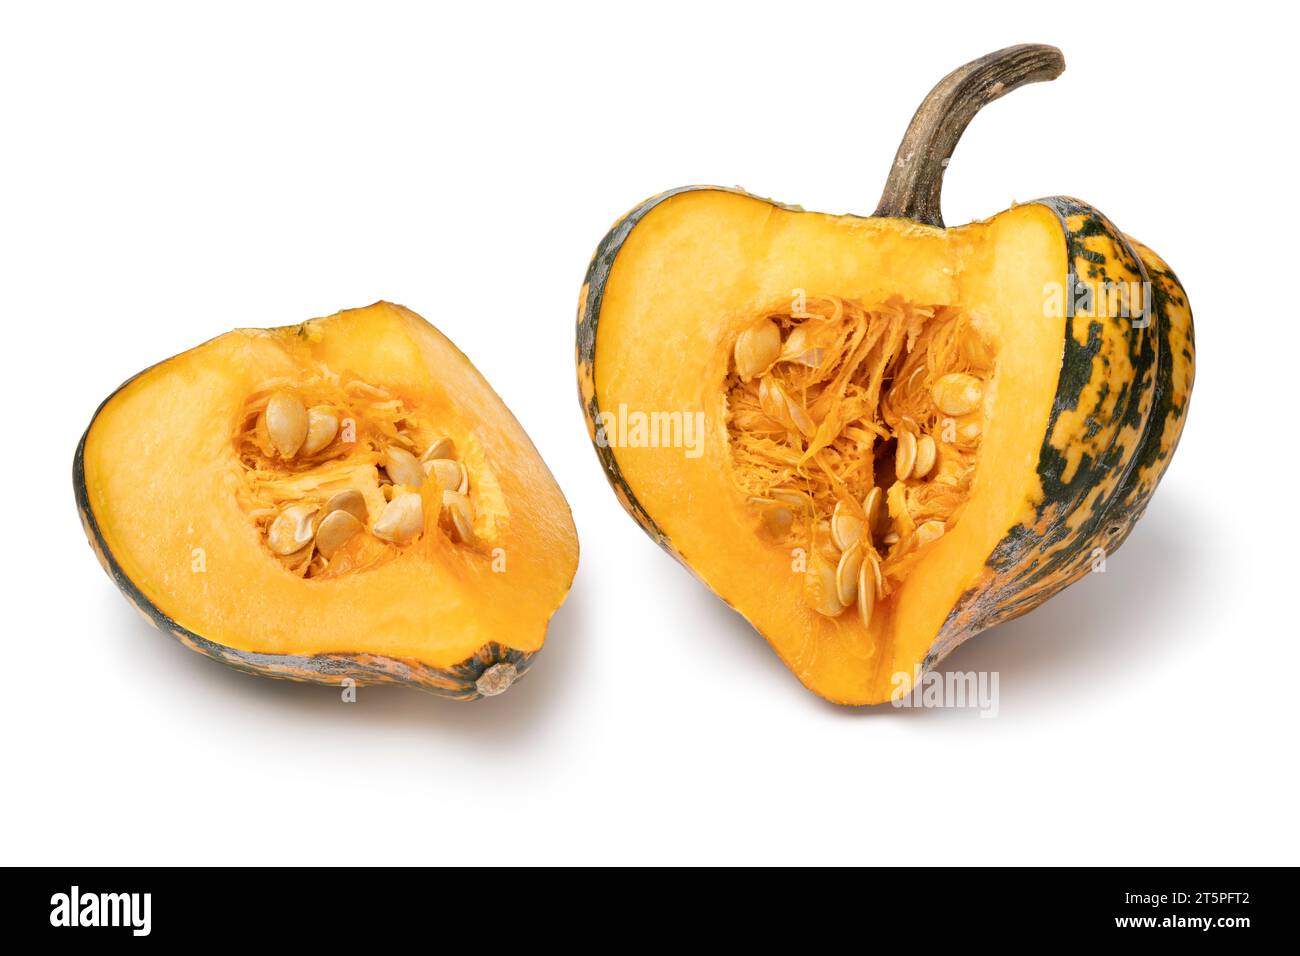 Fresh Acorn Squash and a piece isolated on white background close up Stock Photo